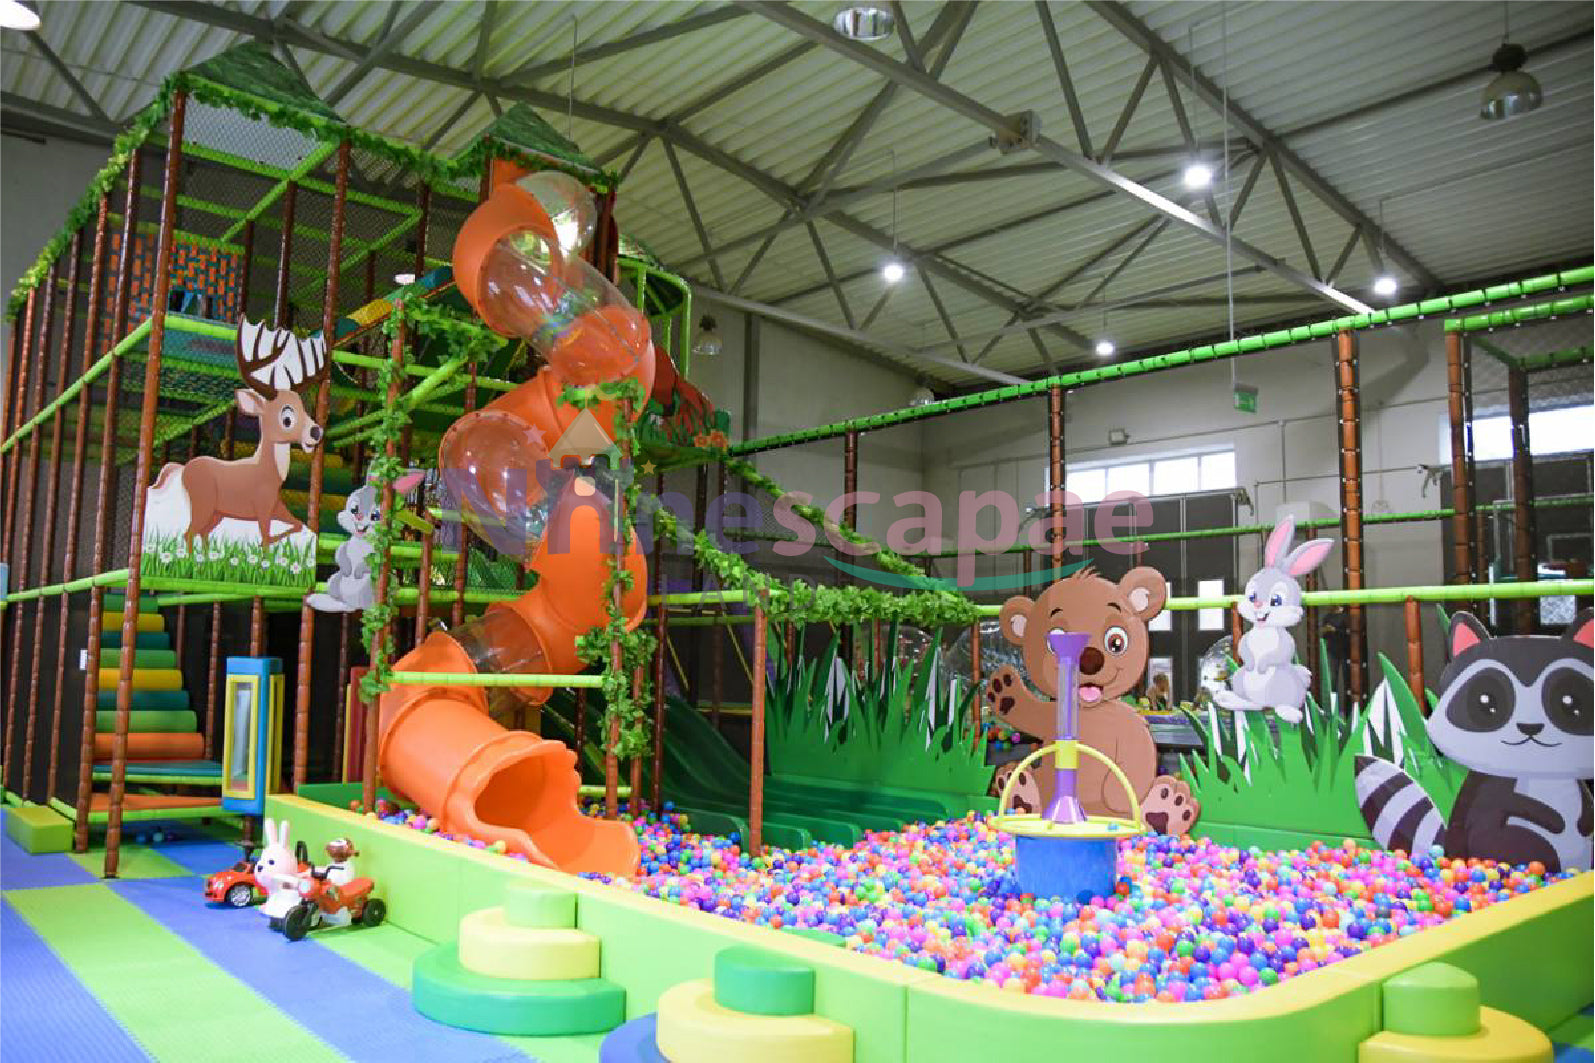 small indoor structure with ball pit